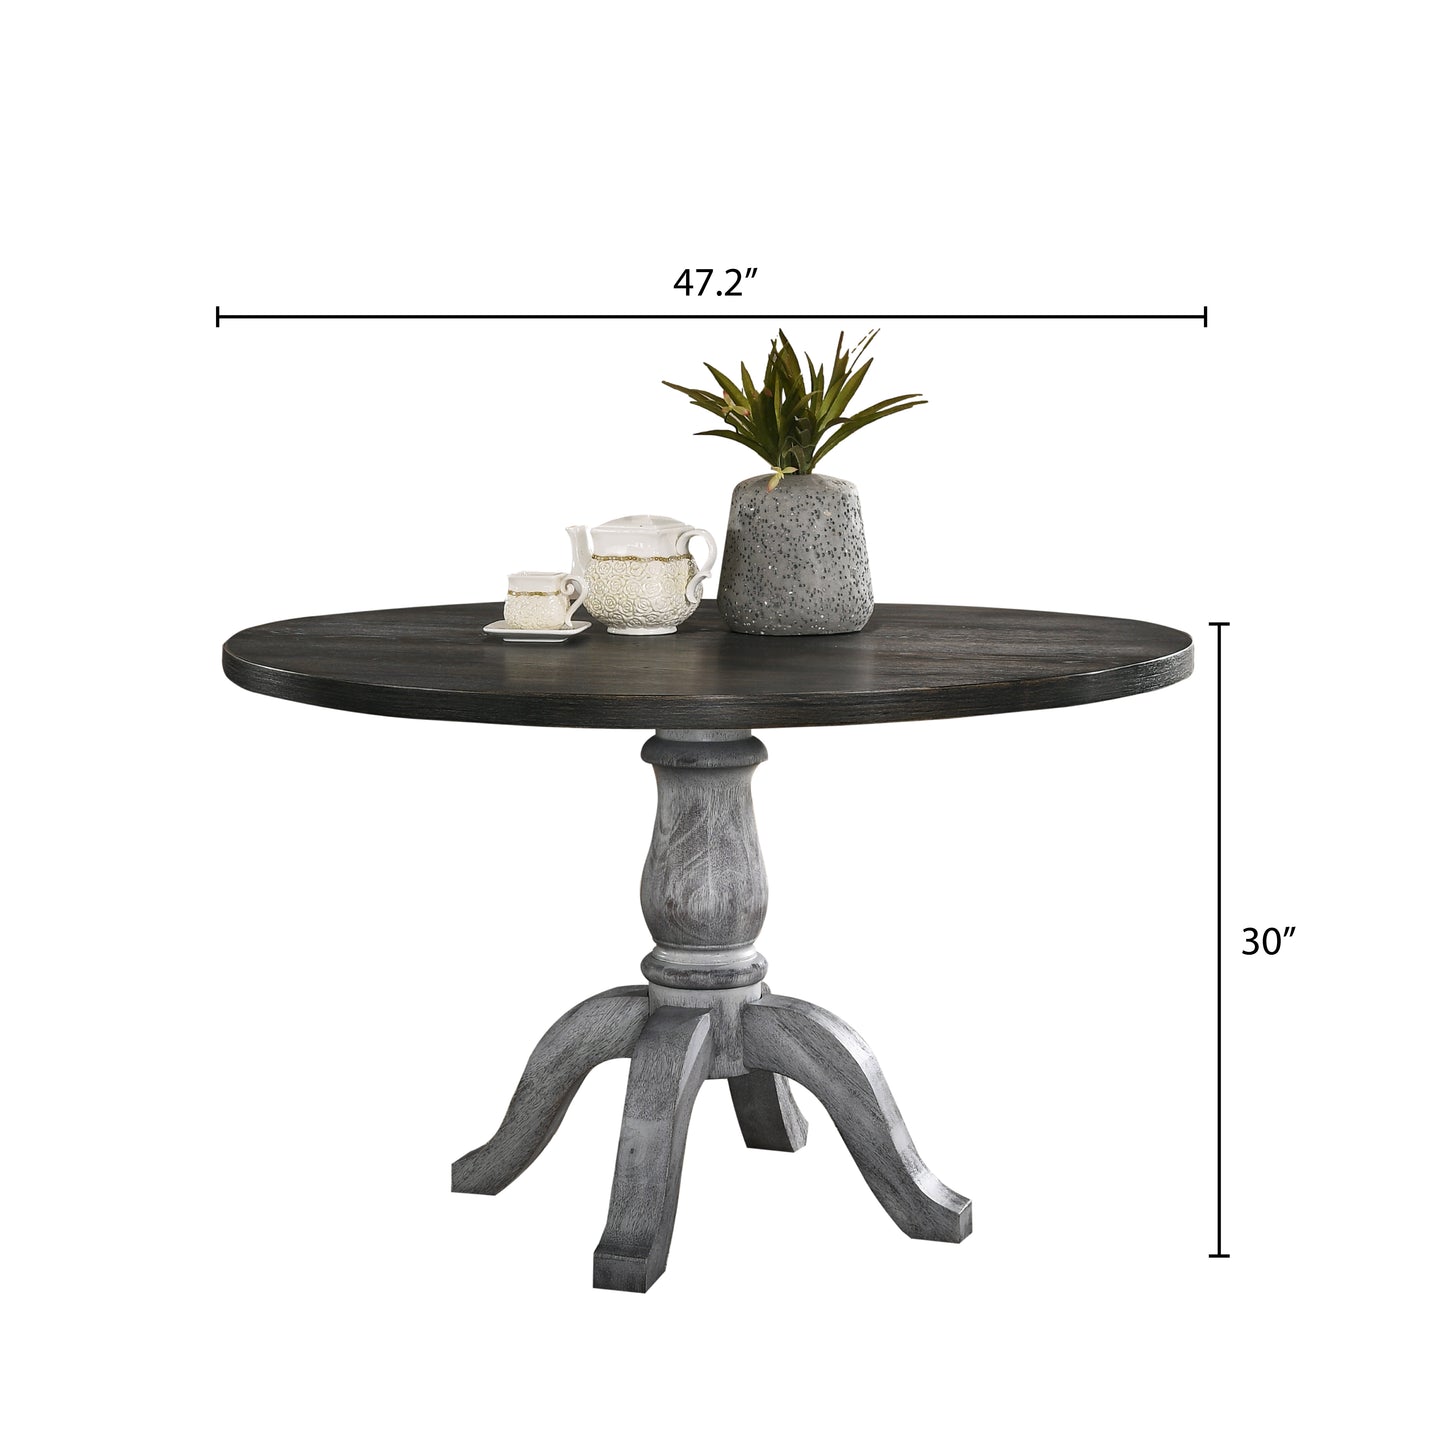 Roundhill Furniture Iris 5-Piece Dining Set, Round Pedestal Table with 4 Chairs, Weathered White and Gray